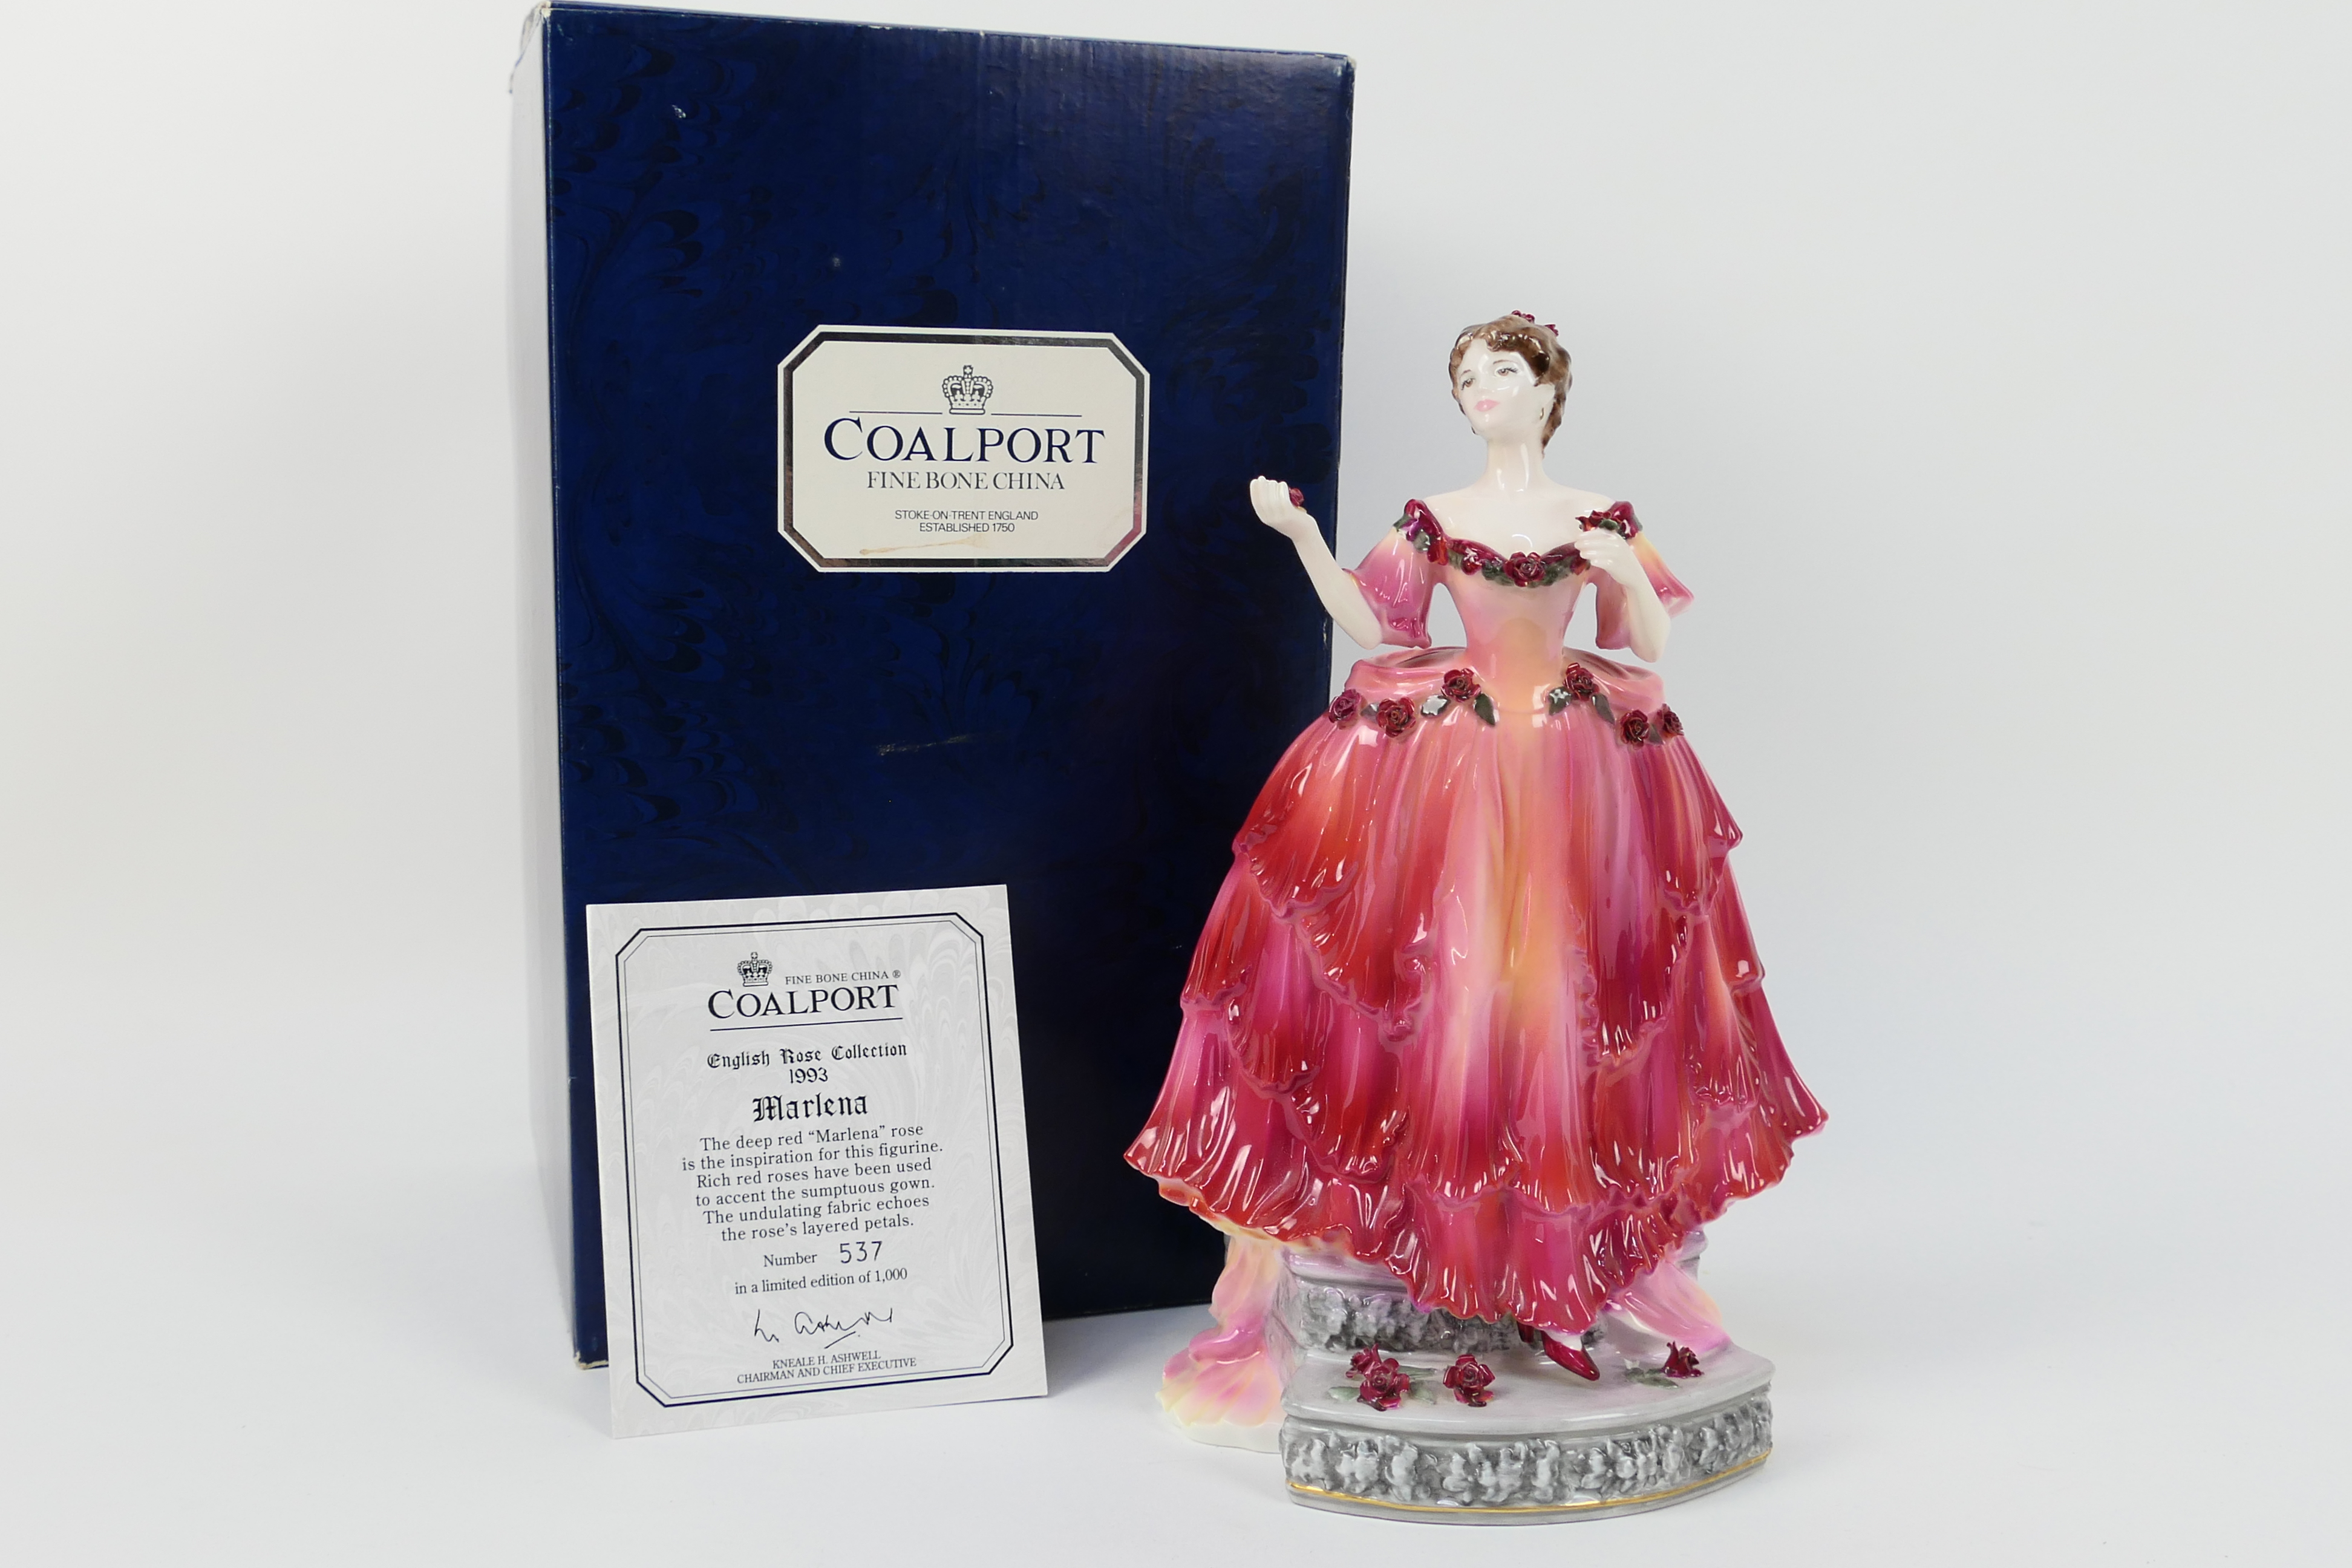 Coalport - A boxed limited edition lady figure from the 1993 English Rose Collection entitled